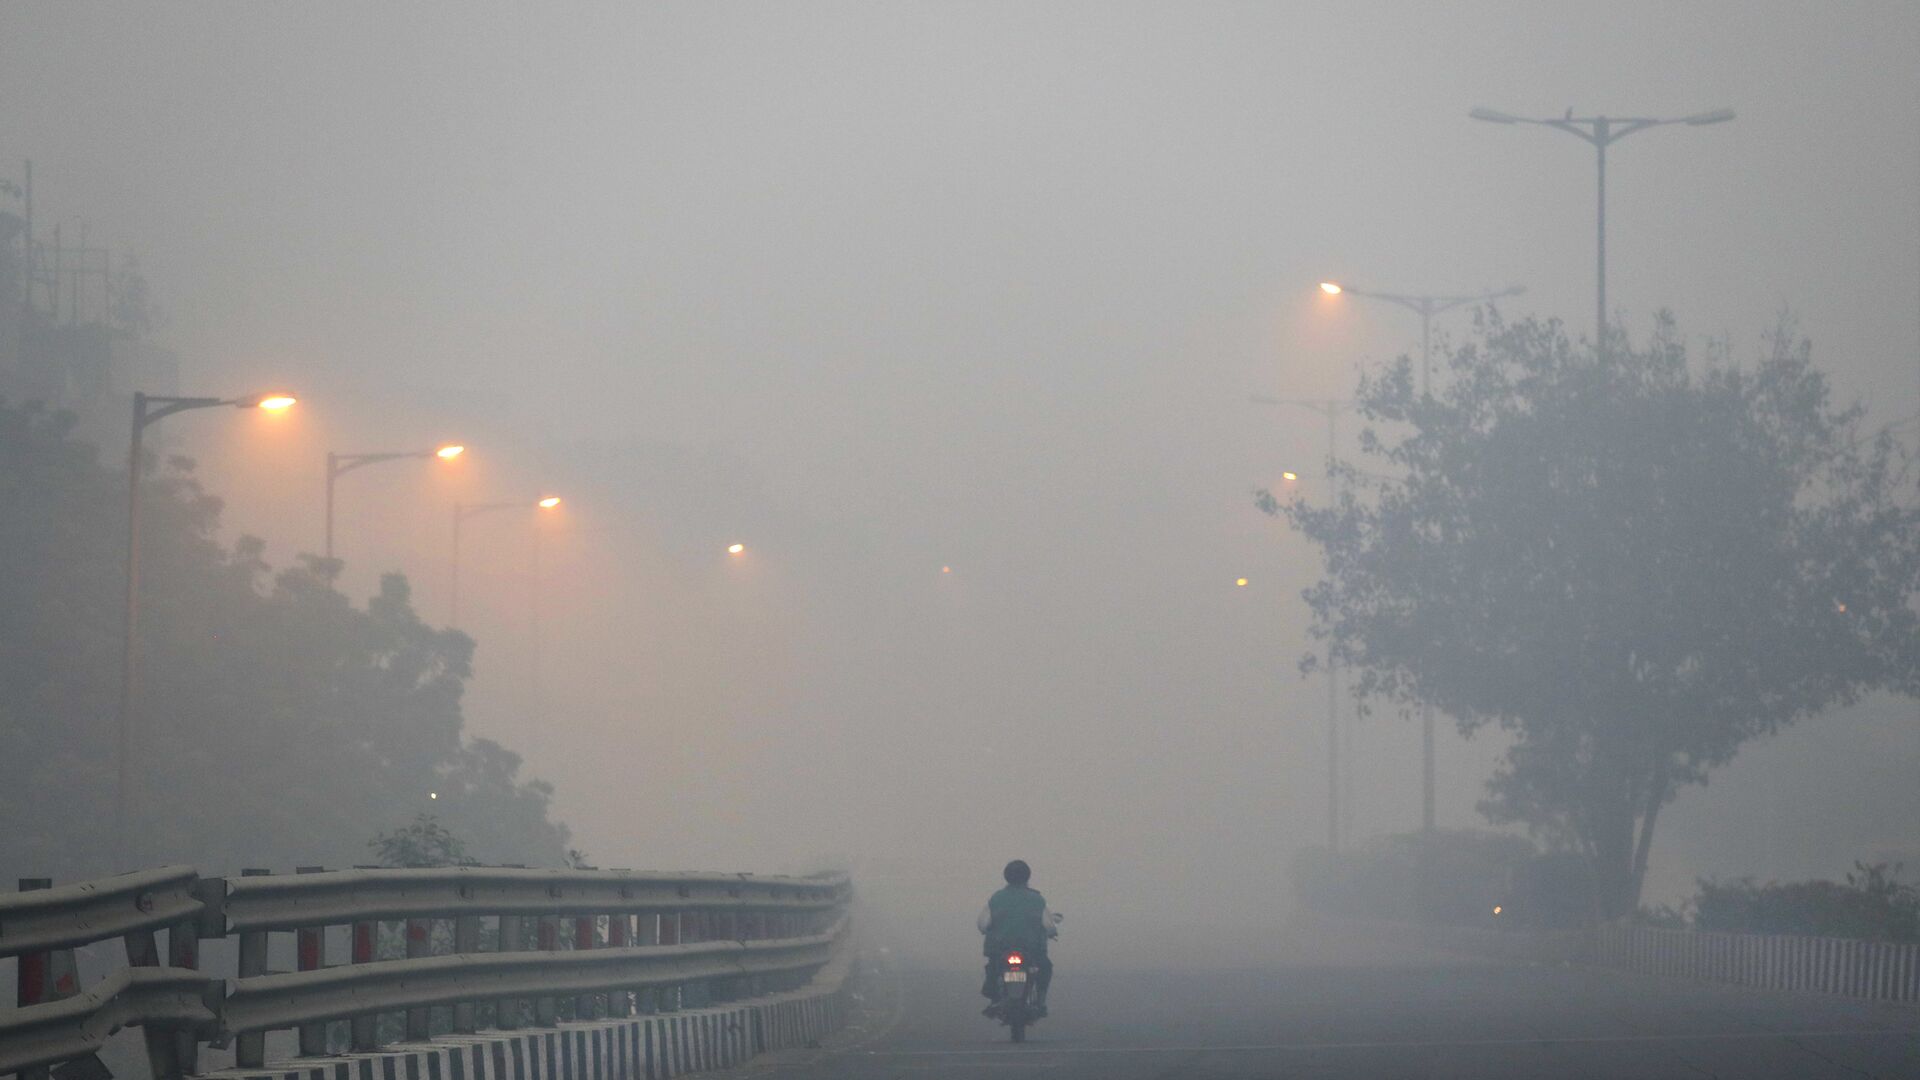 A man rides a scooter on a road enveloped by smoke and smog, on the morning following Diwali festival in New Delhi, India, Monday, Oct. 31, 2016.  - Sputnik International, 1920, 06.11.2021